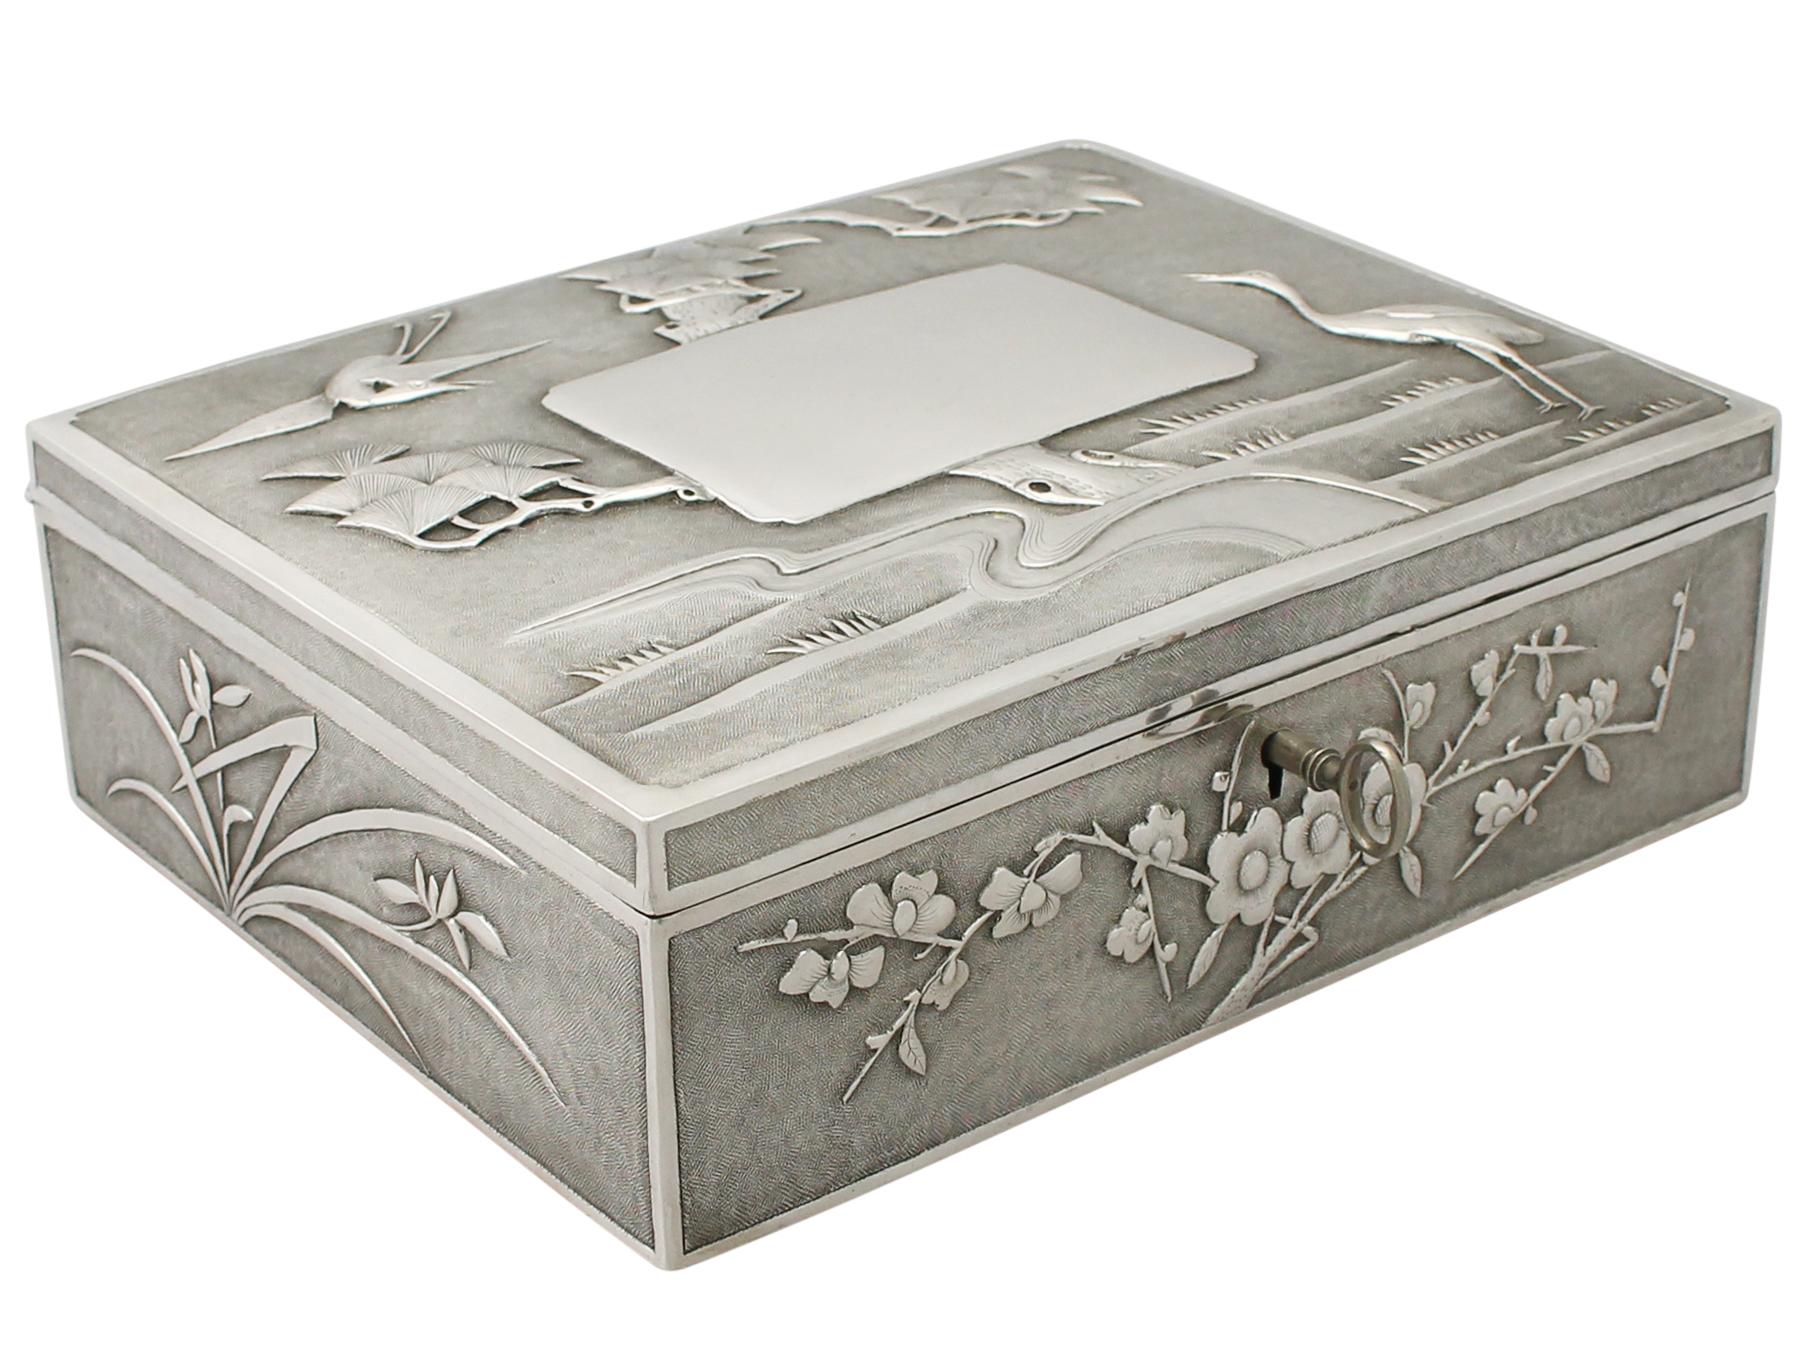 Chinois Antique 1890s Chinese Export Silver Locking Box en vente